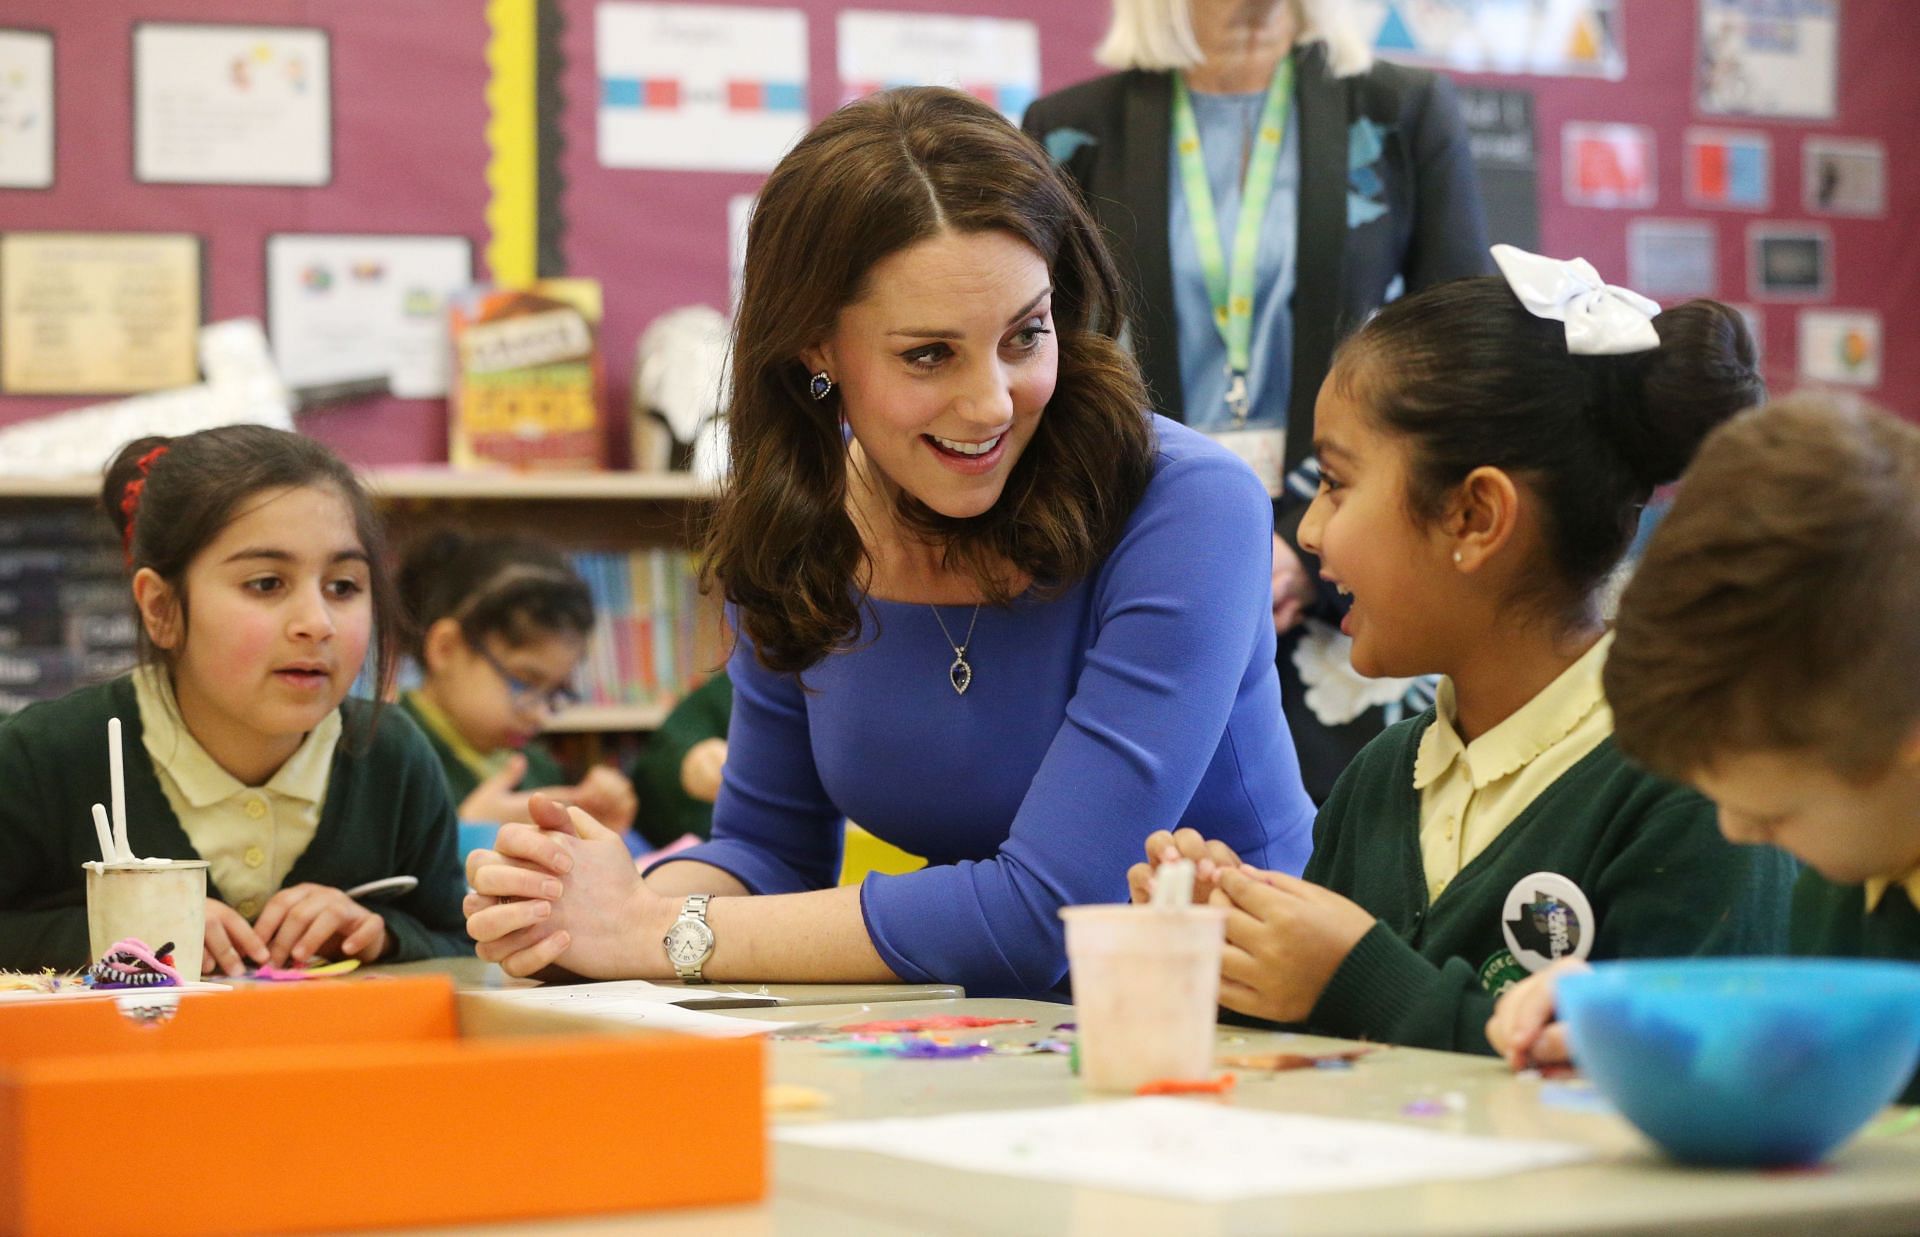 The Duchess Of Cambridge Launches Mental Health Programme For Schools in 2018 (Source: Getty)